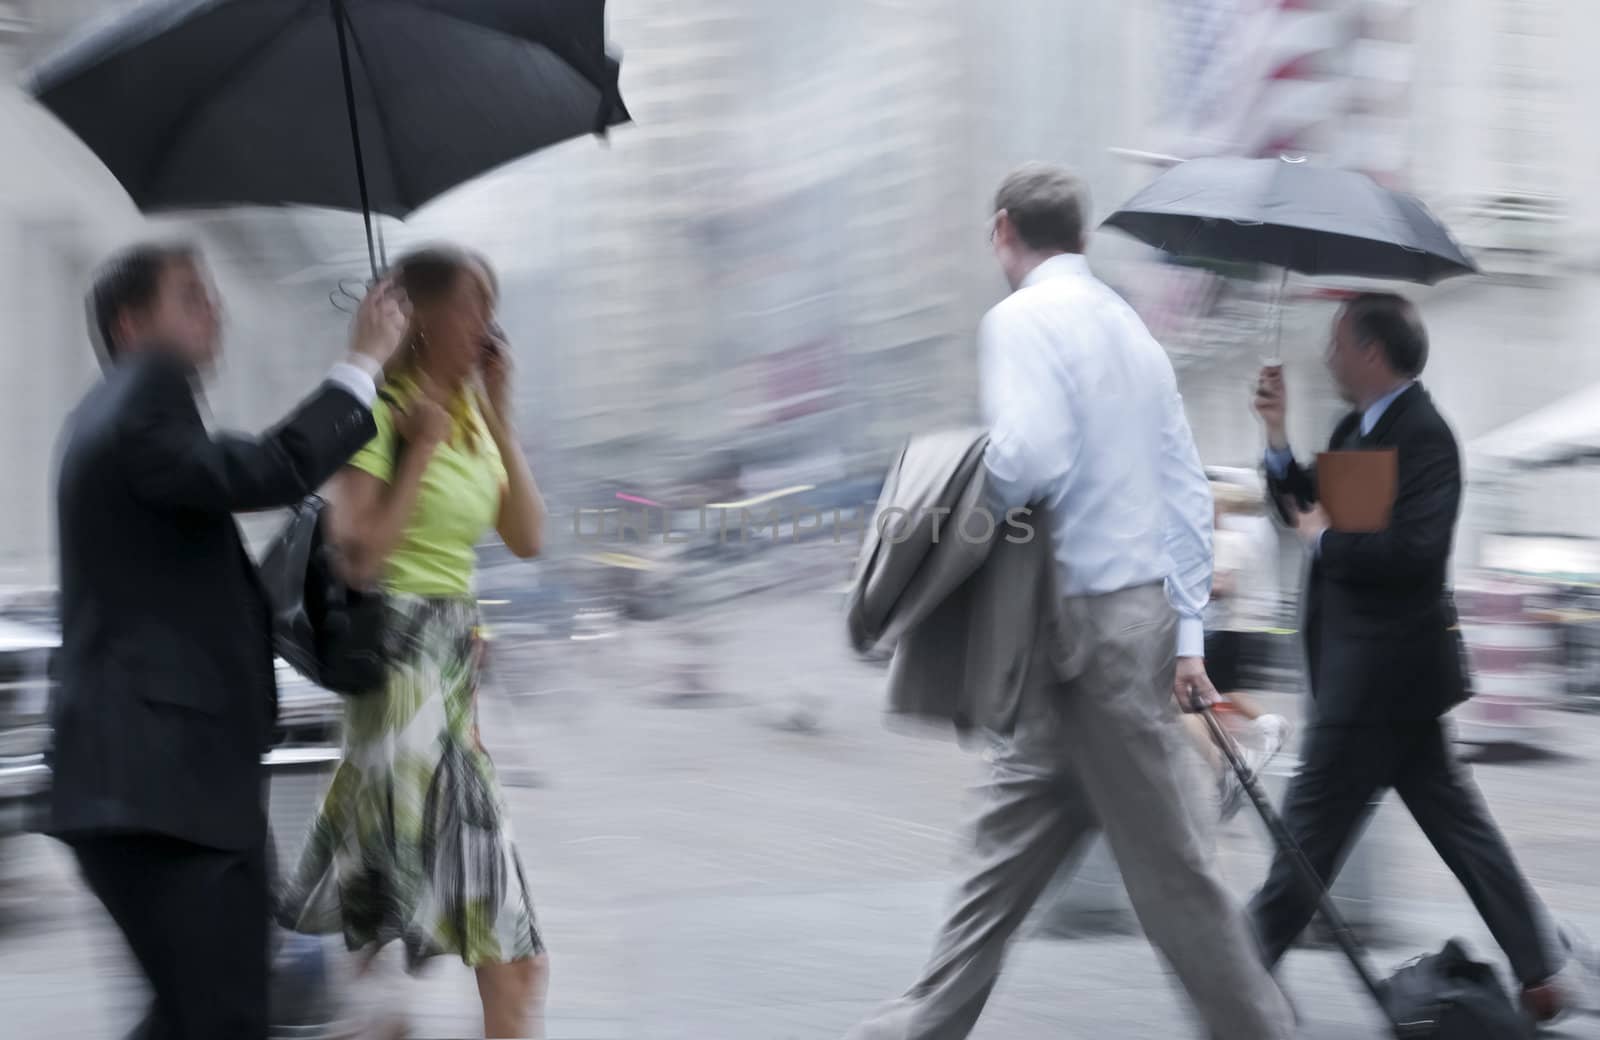 business people rushing on the rainy street in intentional motion blur, intentional blue tint